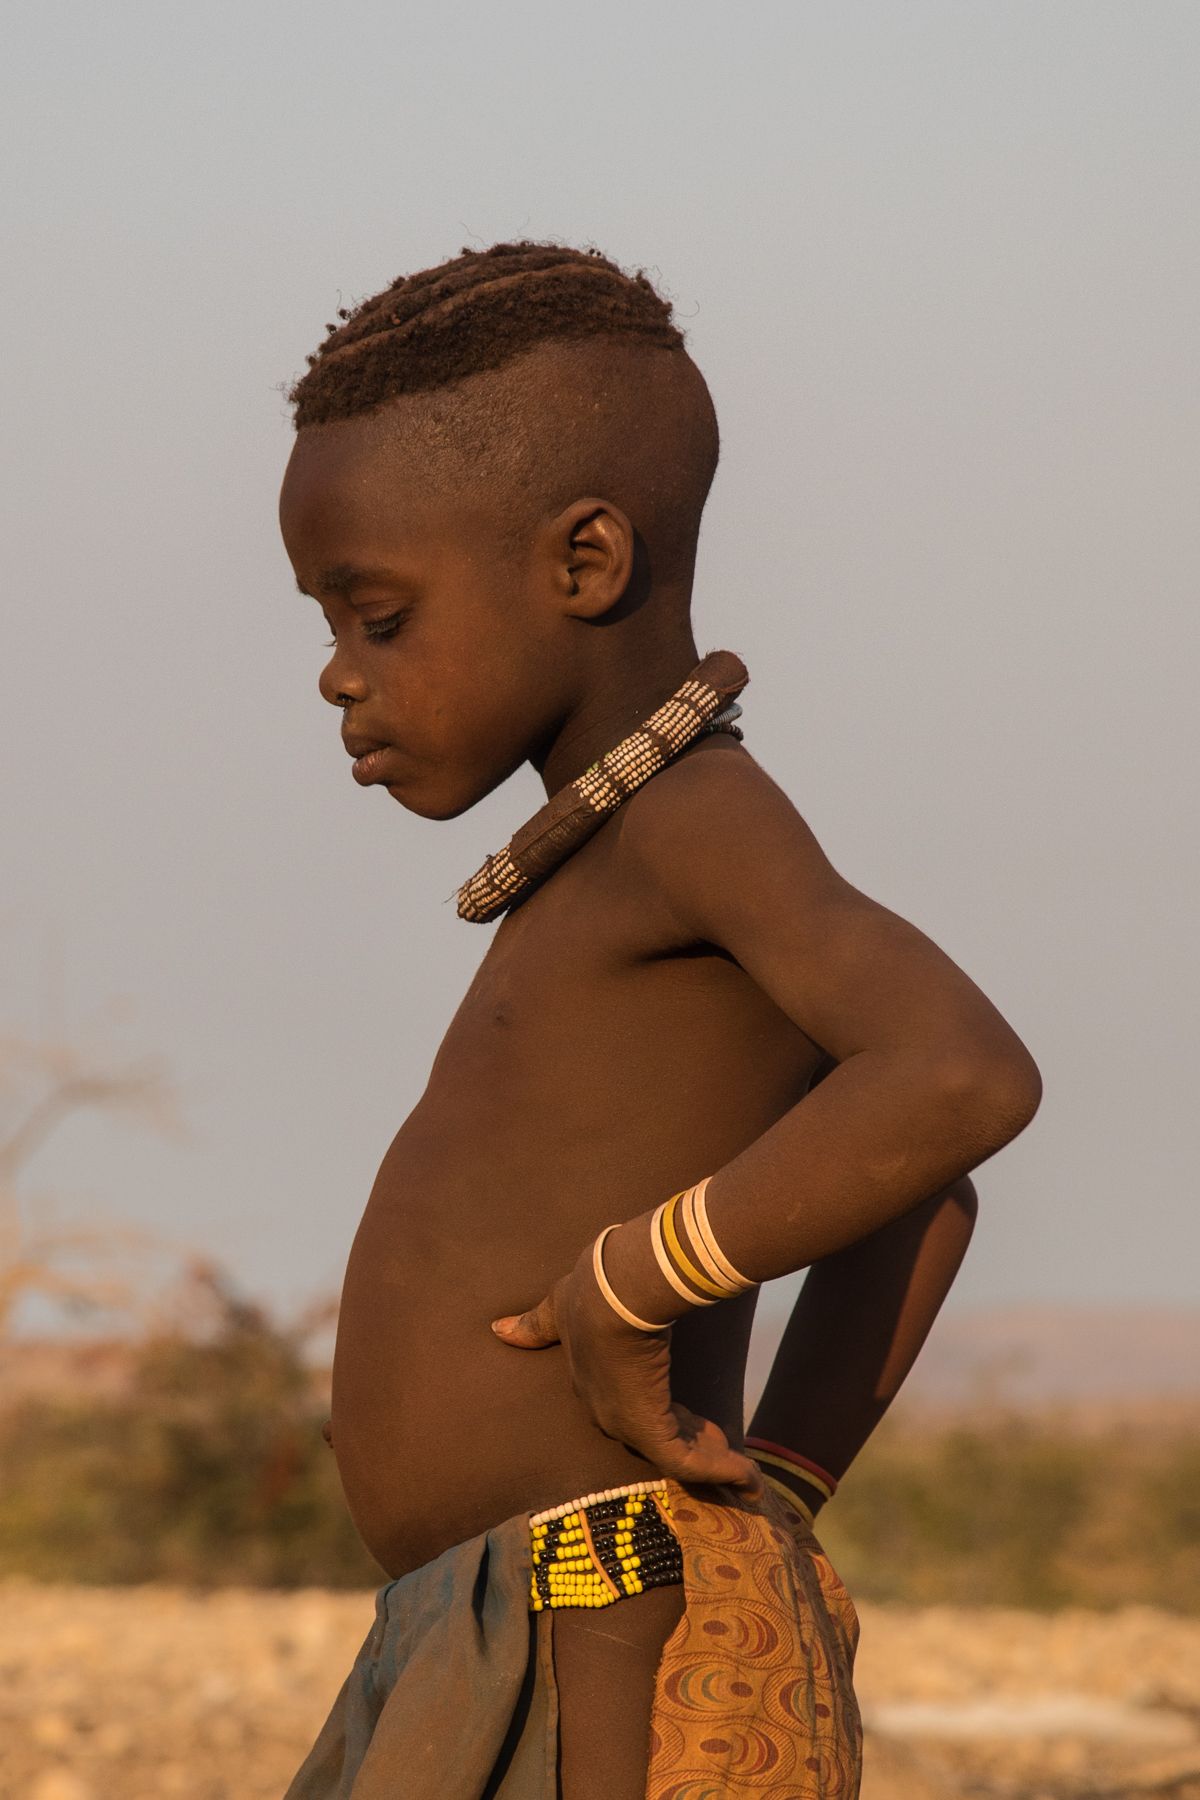 Young Himba boy in contemplation